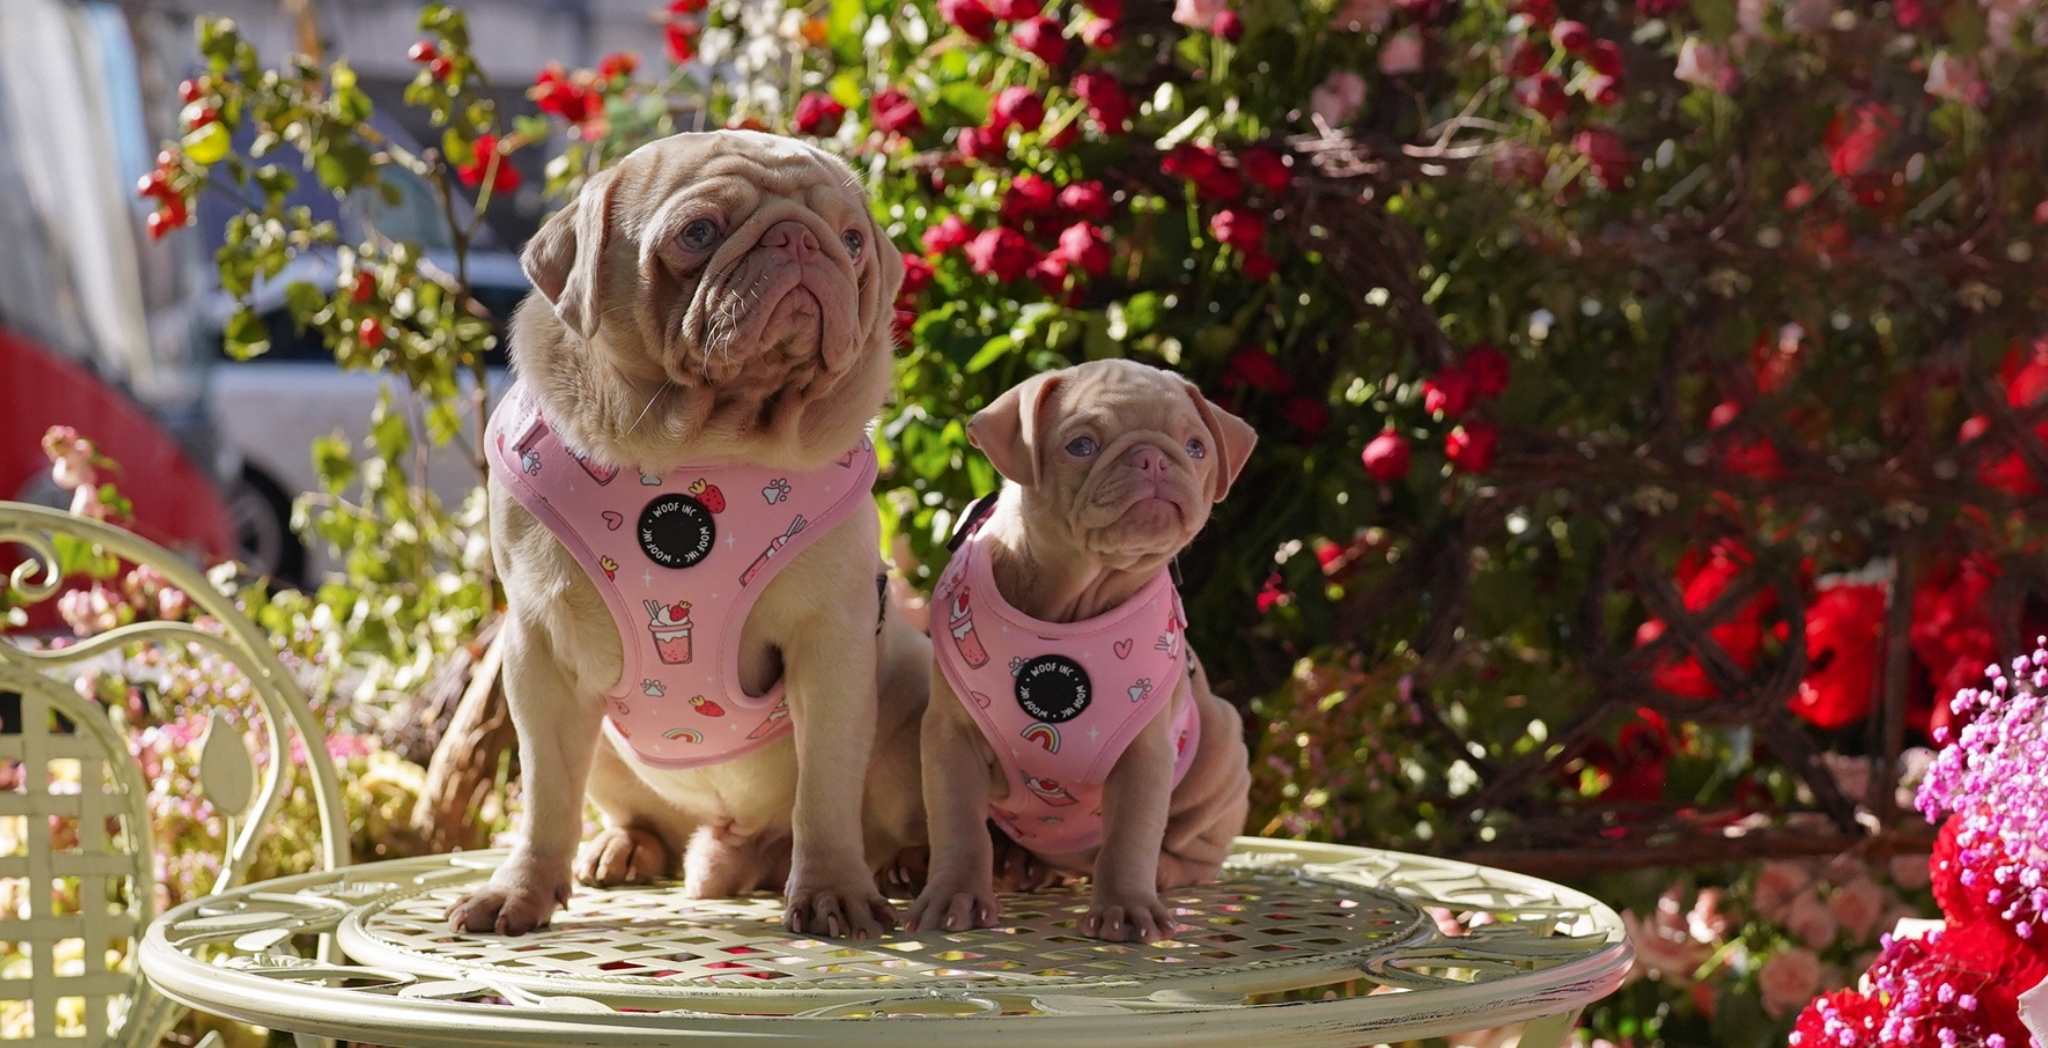 Milkshake the pug and cookie at the Chelsea in Bloom flower exhibition in London